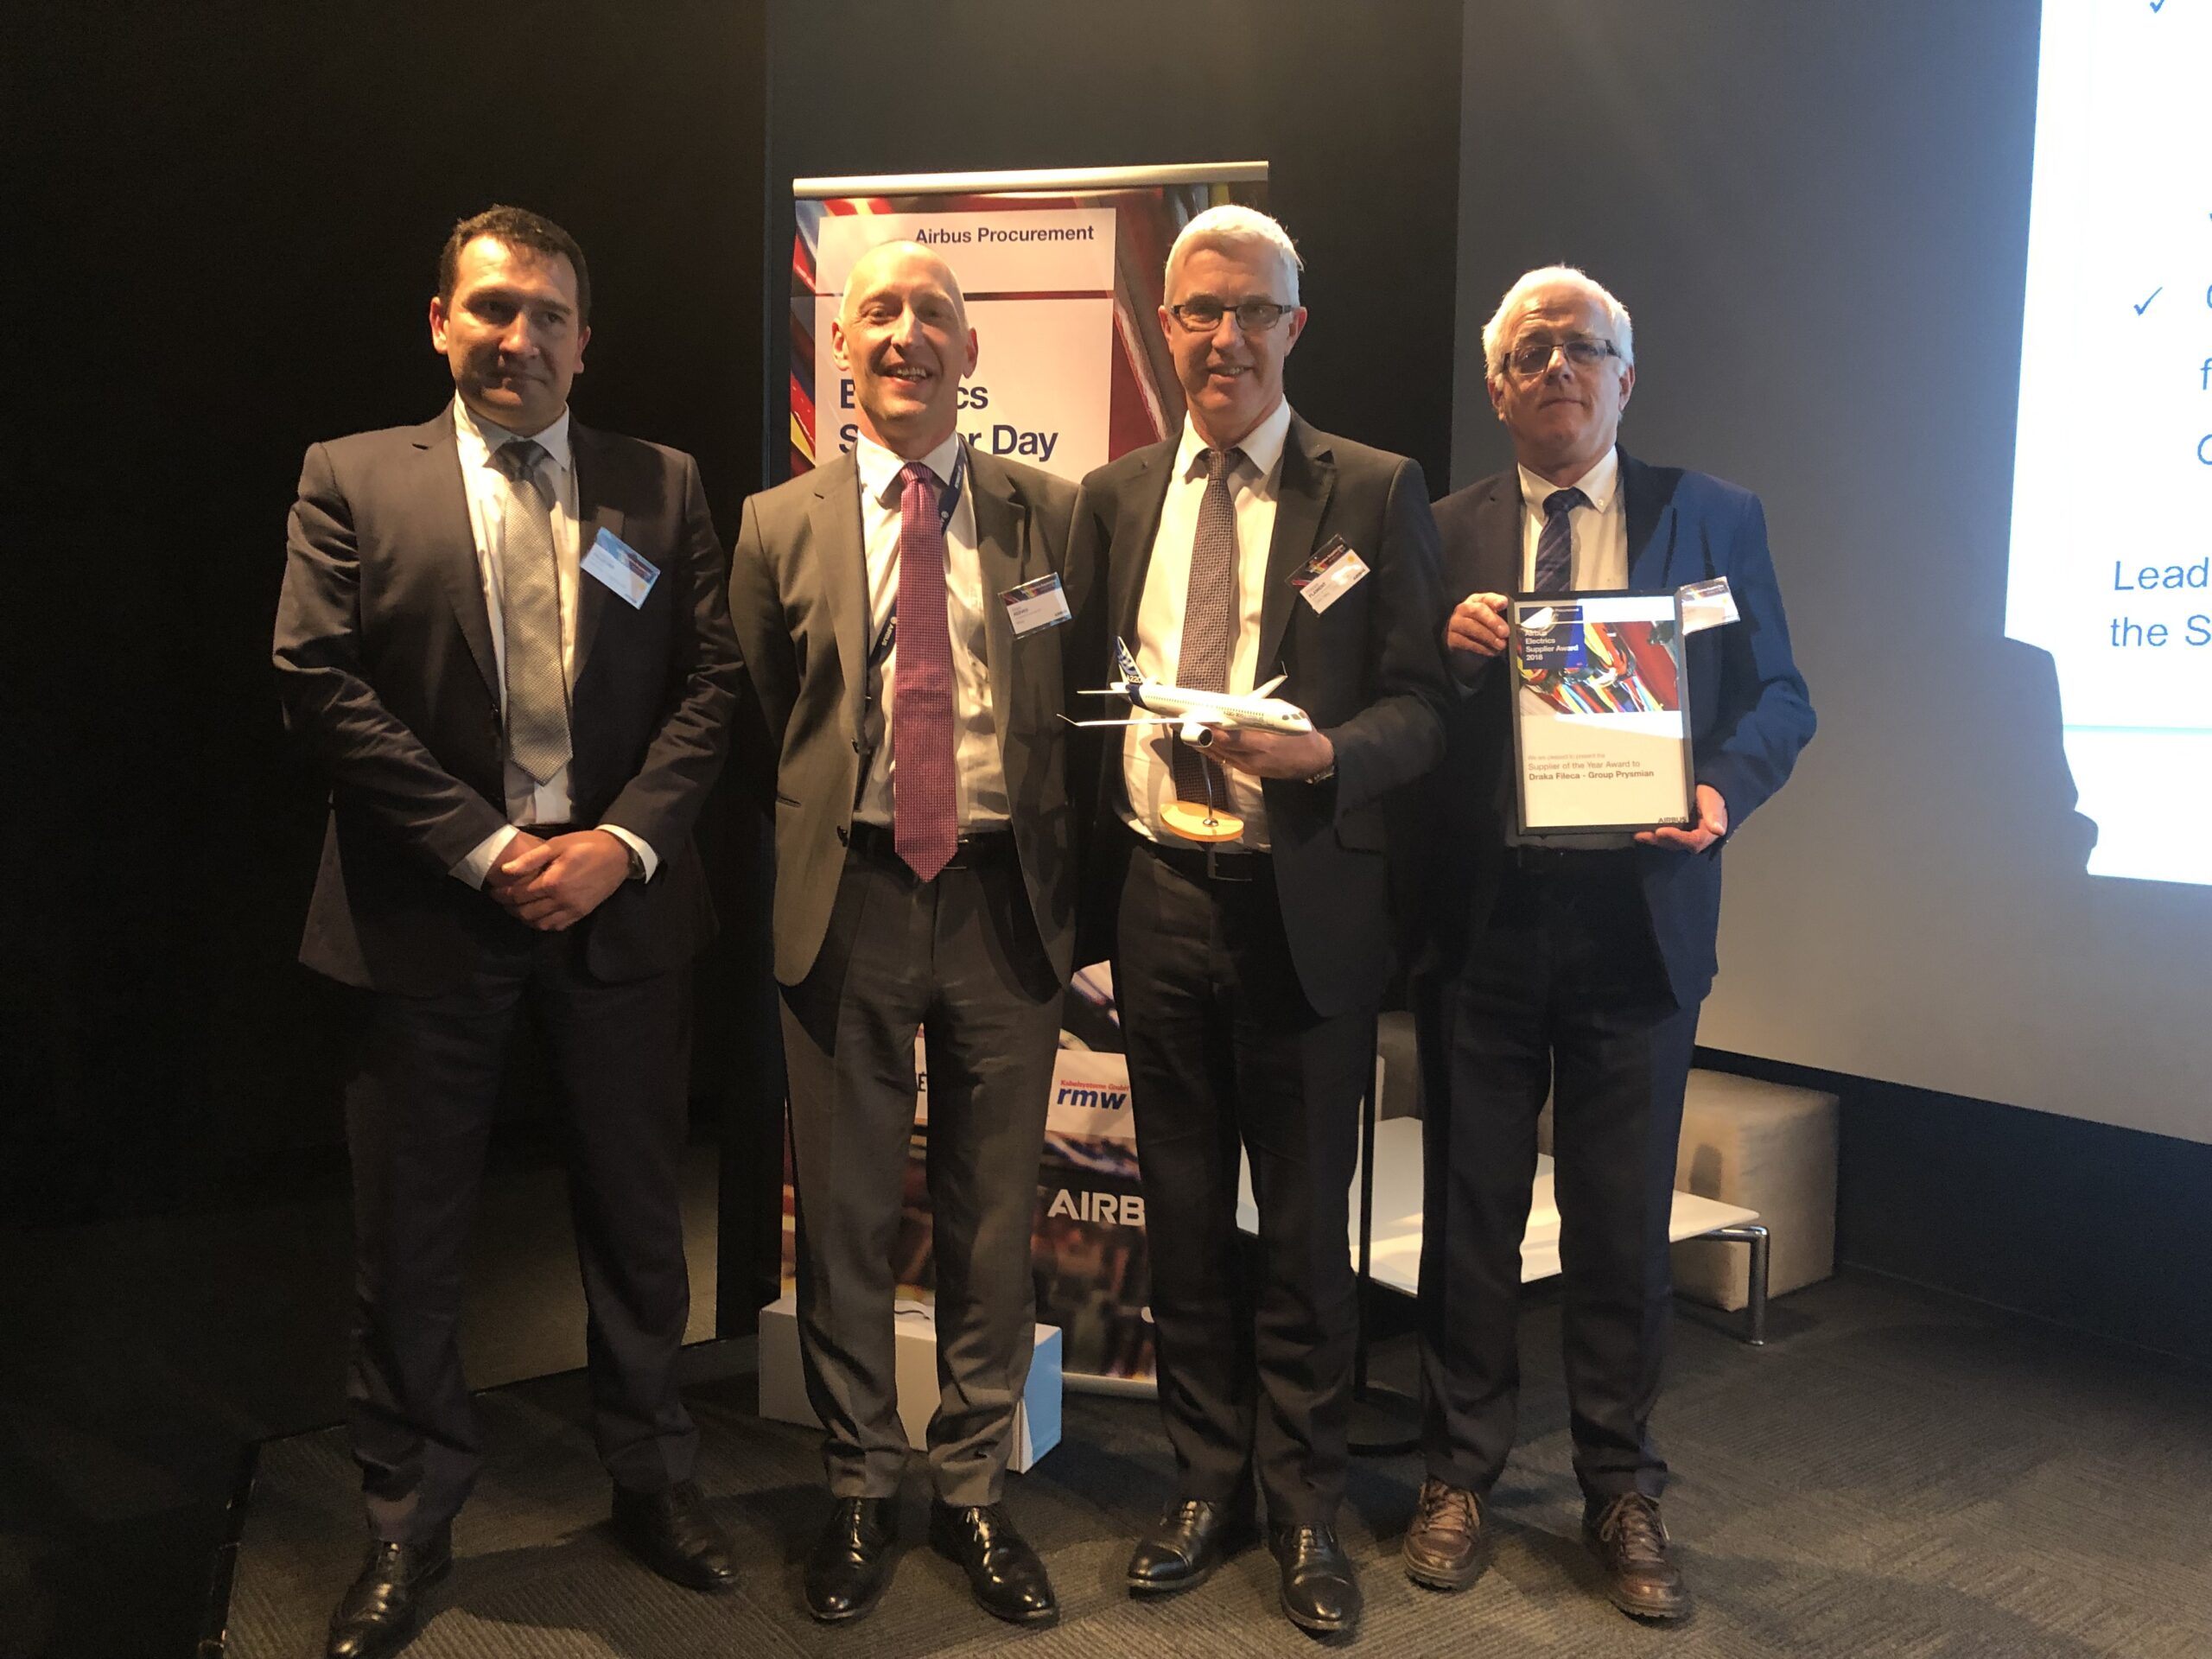 DRAKA FILECA, FILIALE DE PRYSMIAN GROUP, REMPORTE L’AIRBUS ENGINEERING AWARD 2018   ET L’AIRBUS SUPPLIER OF THE YEAR AWARD 2018.